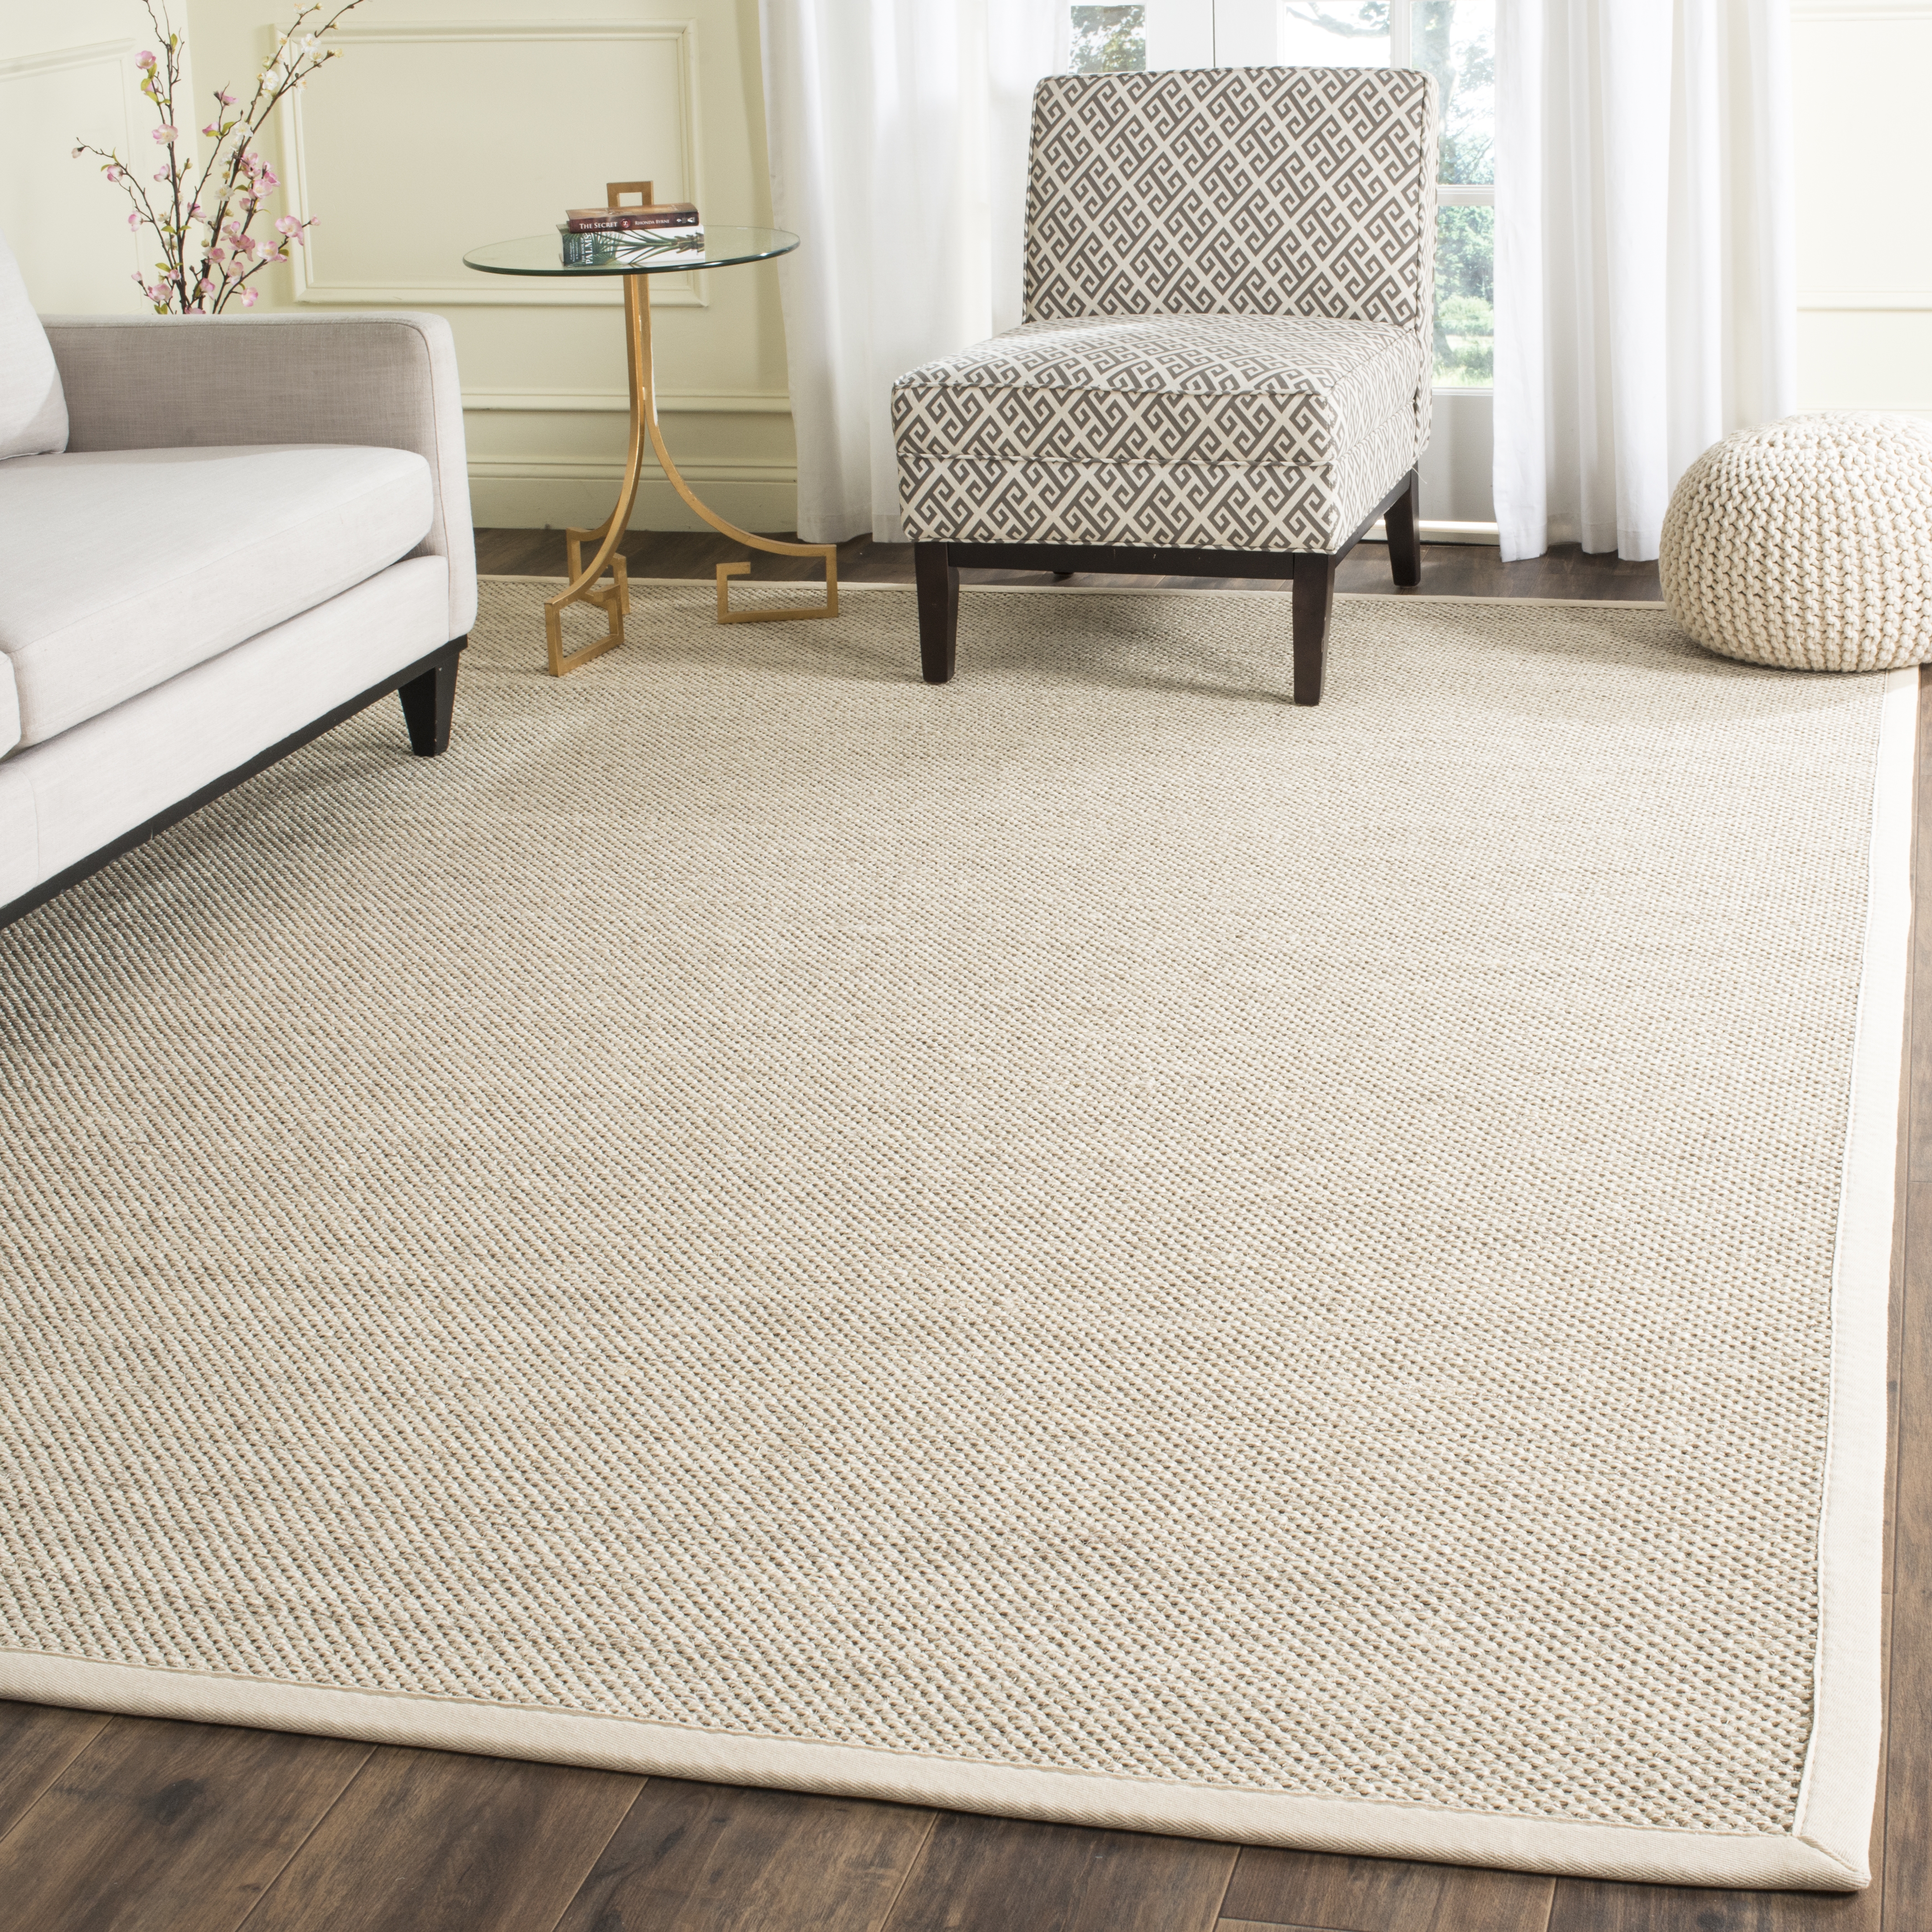 Arlo Home Woven Area Rug, NF143C, Marble/Beige,  8' X 10' - Image 1